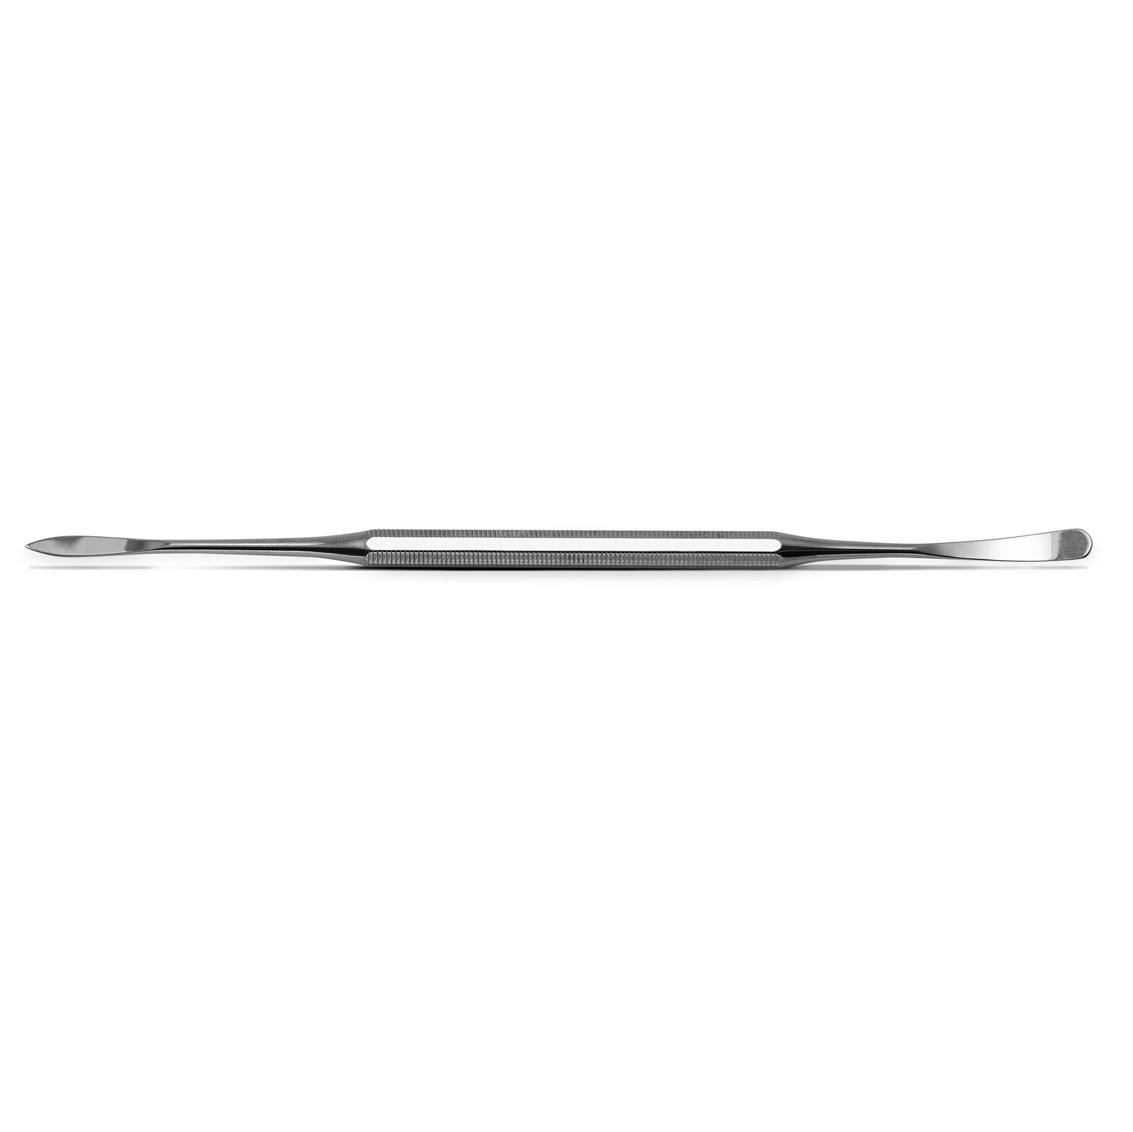 Professional stainless steel double-pointed curette